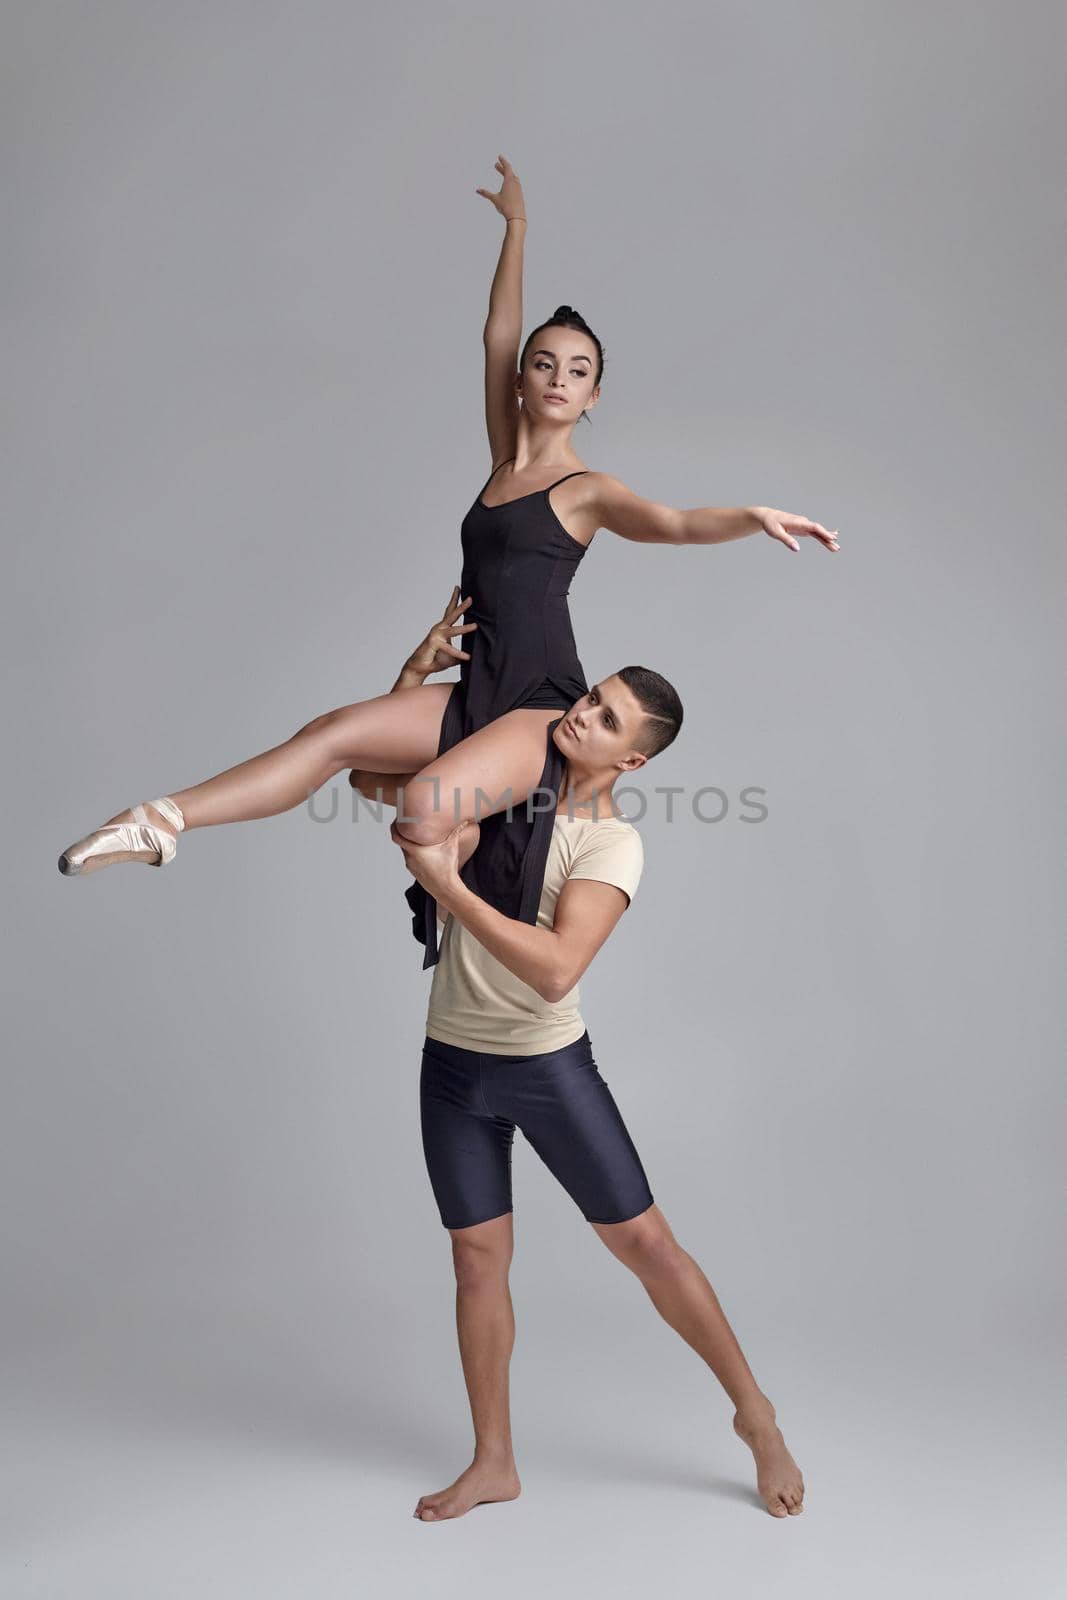 Studio shot of a modern ballet dancers posing over a gray background. Strong man in black shorts with beige t-shirt is holding a beautiful girl in a black dress and white pointe shoes in his strong hands. Ballet and contemporary choreography concept. Art photo.